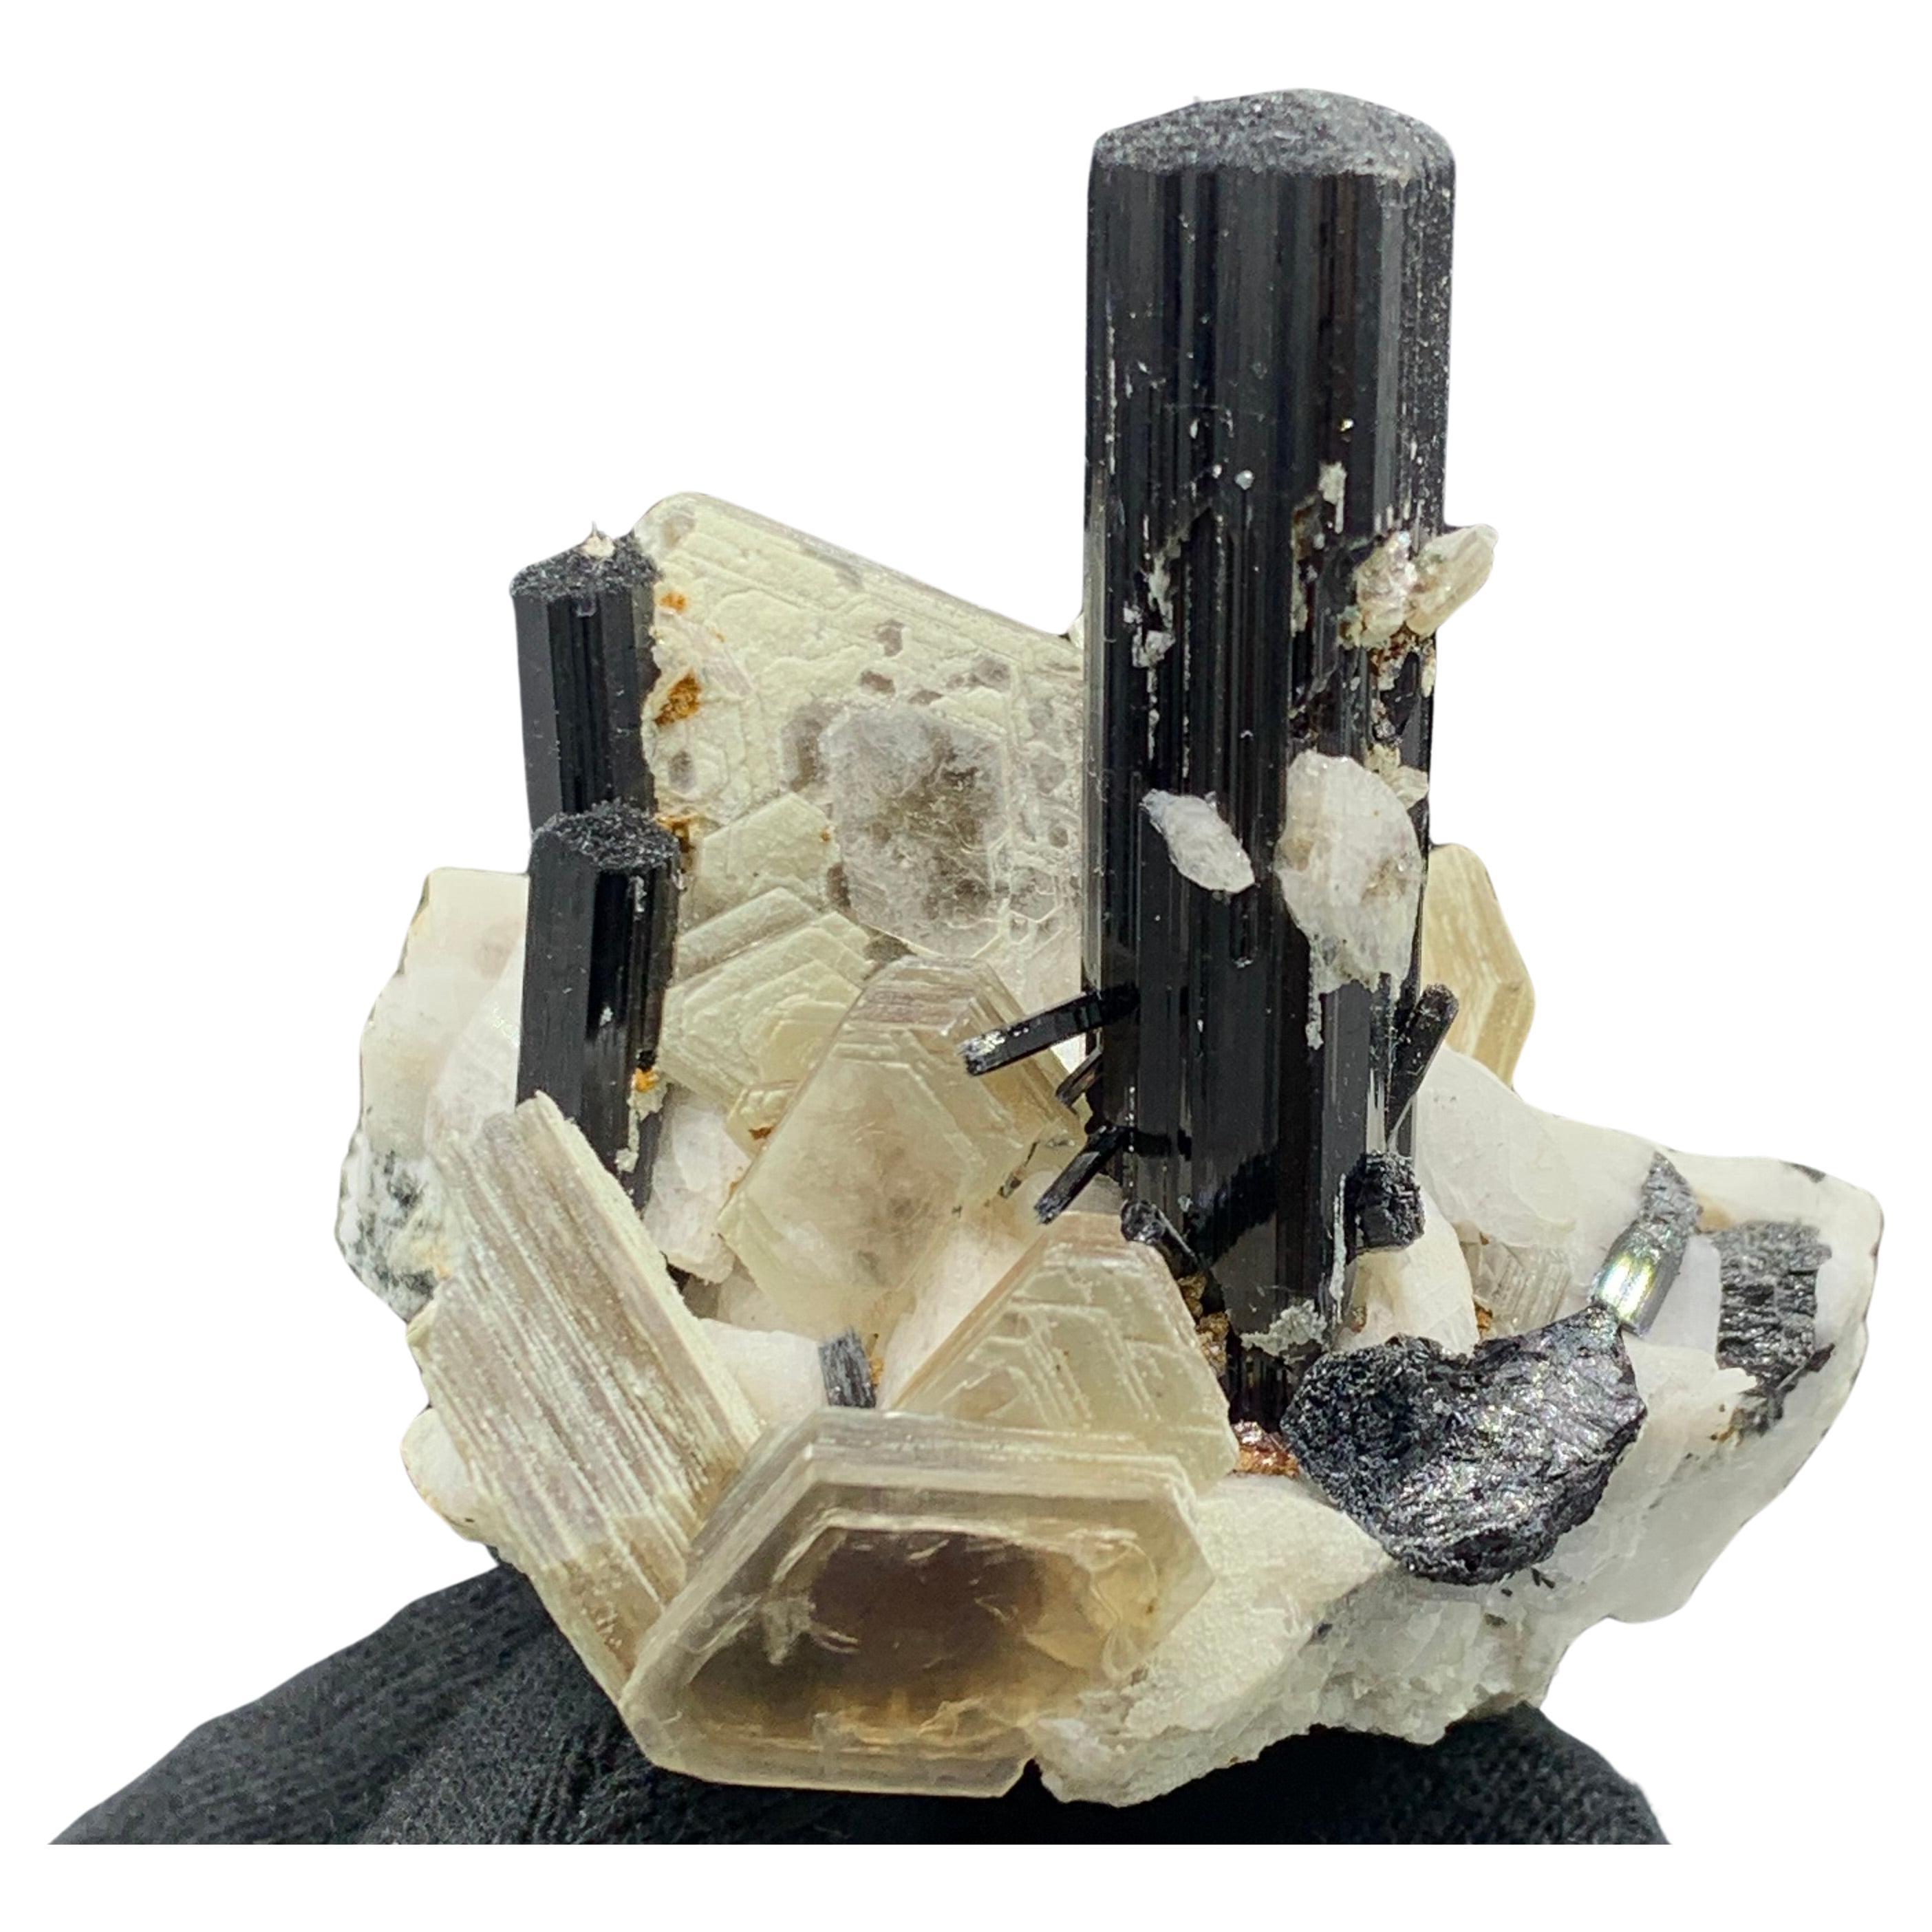 102.07 Gram Black Tourmaline Specimen Attached With Muscovite From Pakistan 